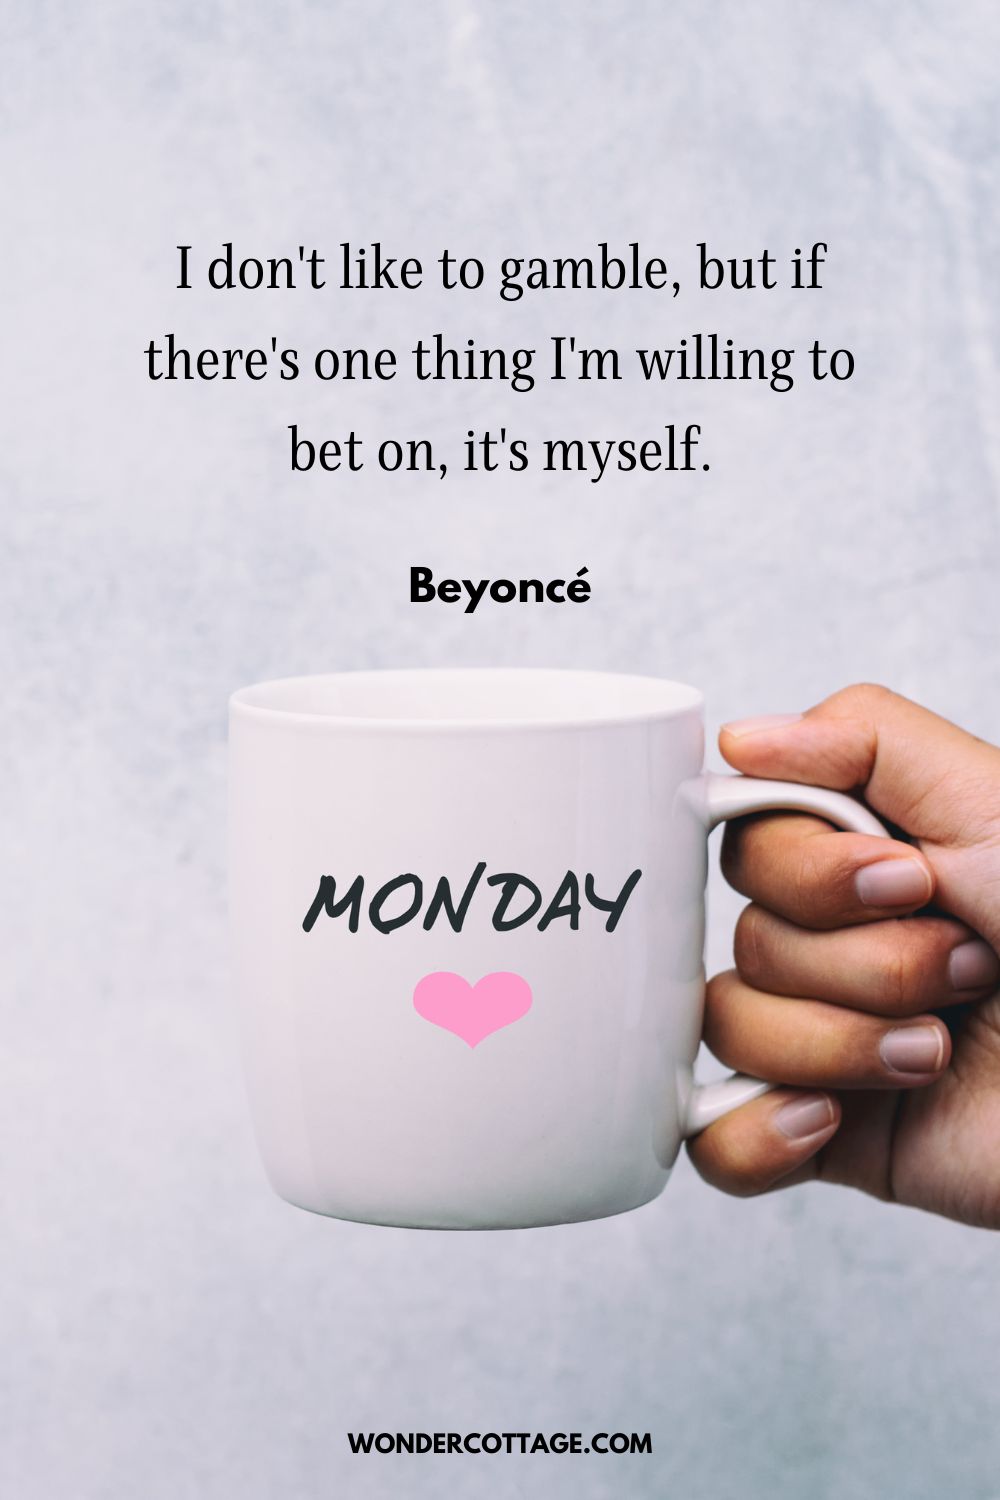 I don't like to gamble, but if there's one thing I'm willing to bet on, it's myself.
Beyoncé - Motivational Monday Quotes